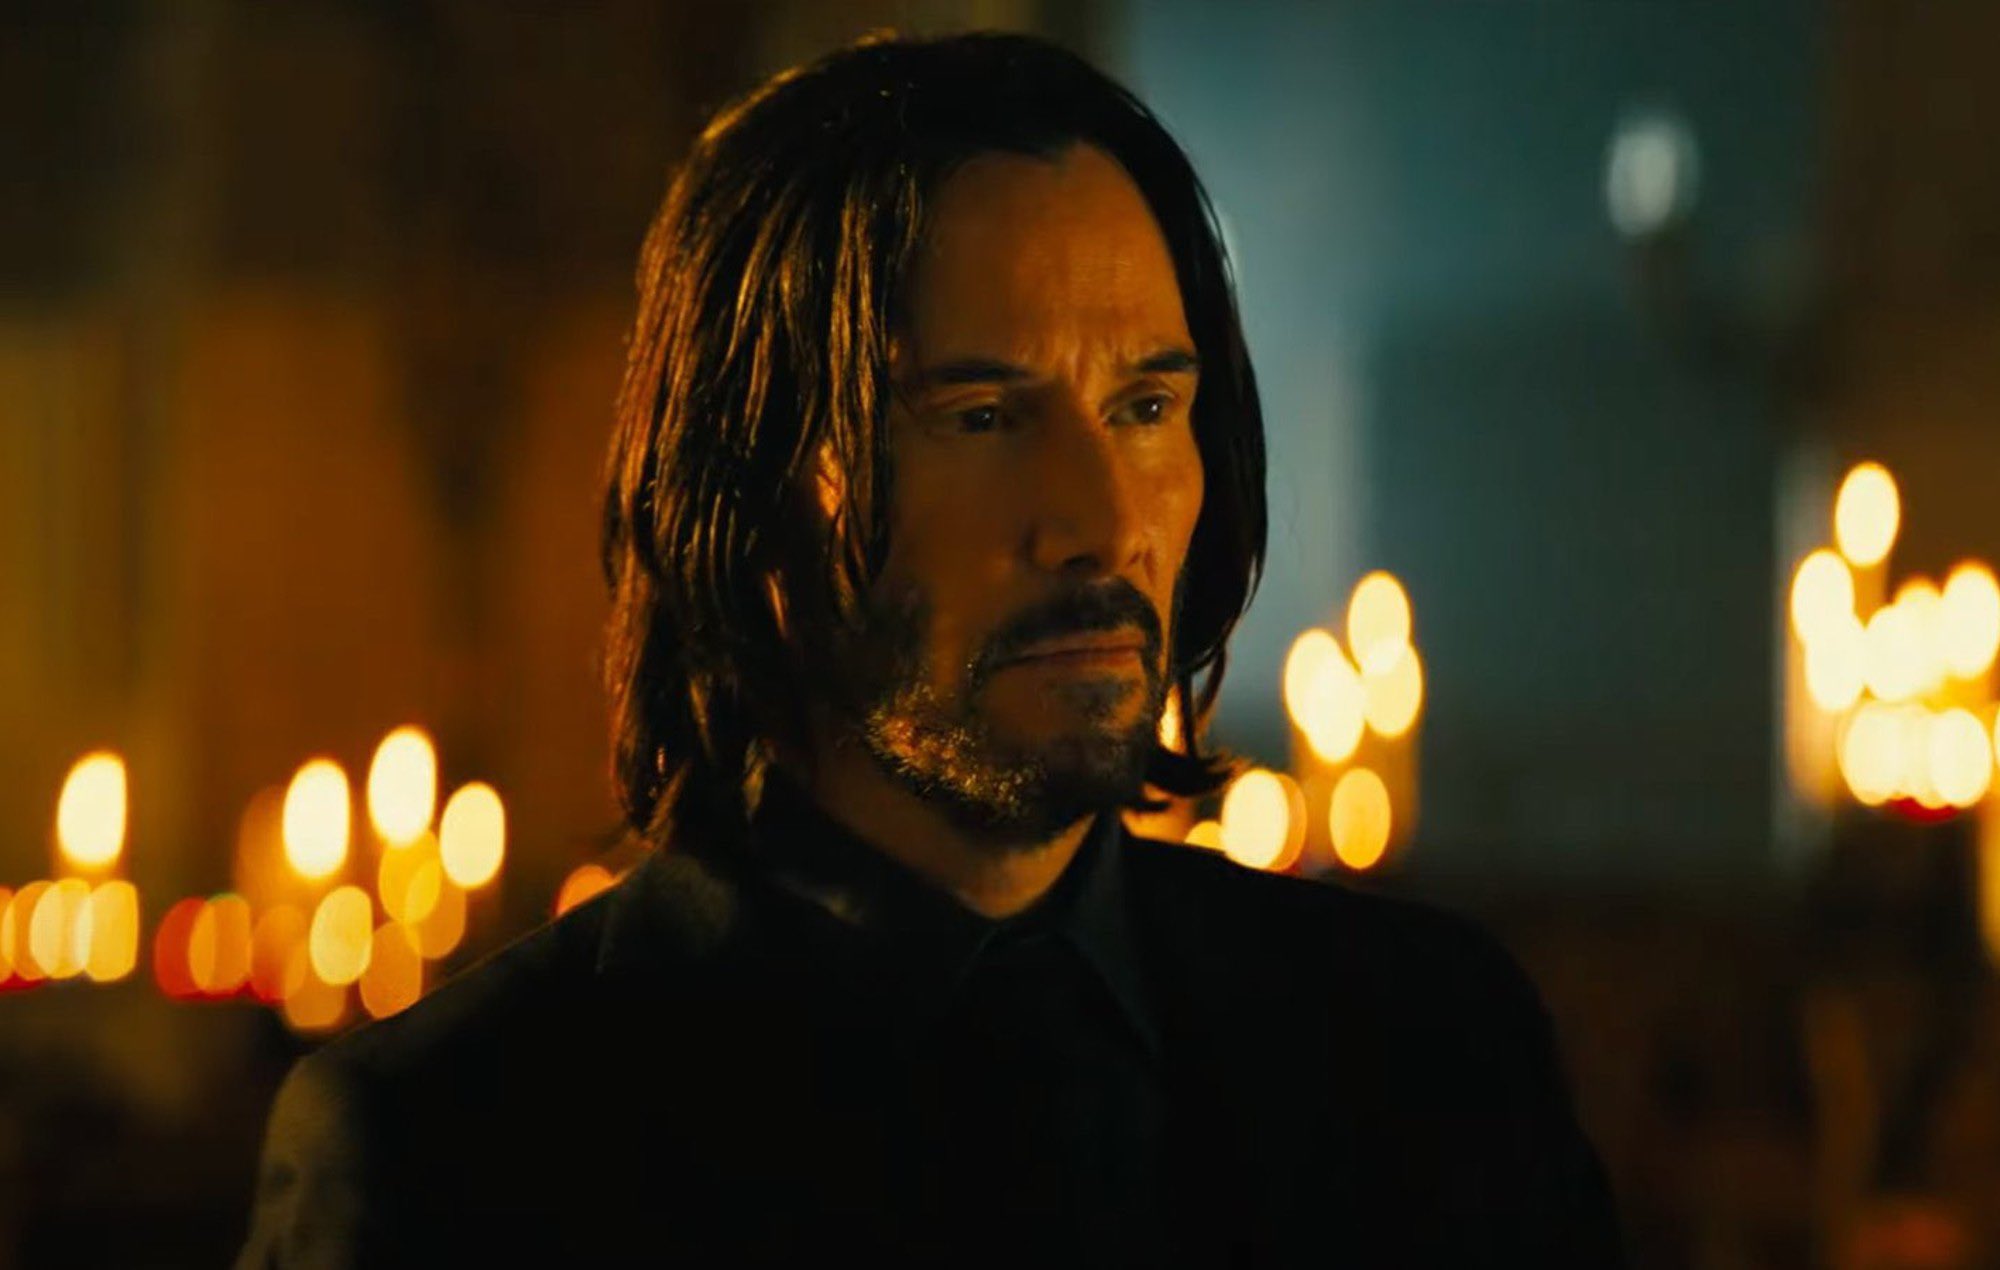 John Wick 5': Lionsgate Confirms Sequel in Early Development – The